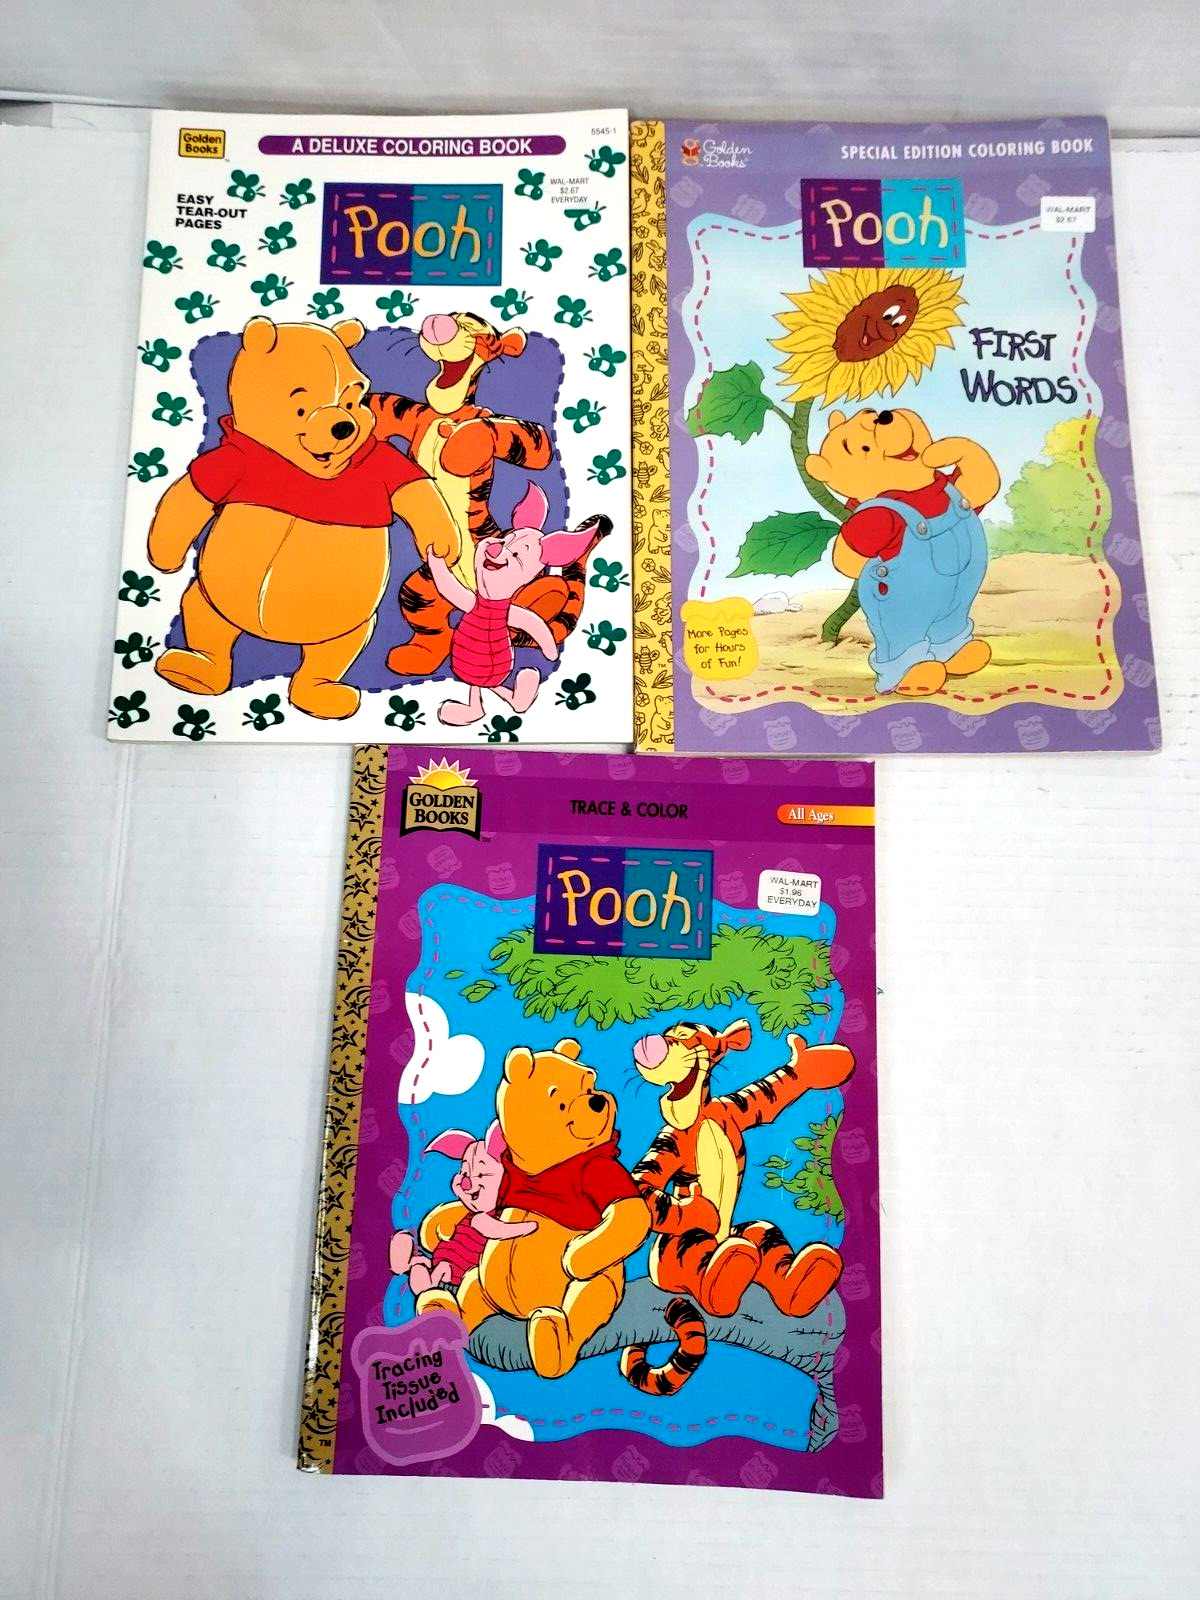 Vintage Disney Pooh Golden Books Deluxe Coloring Books First Words Trace & Color